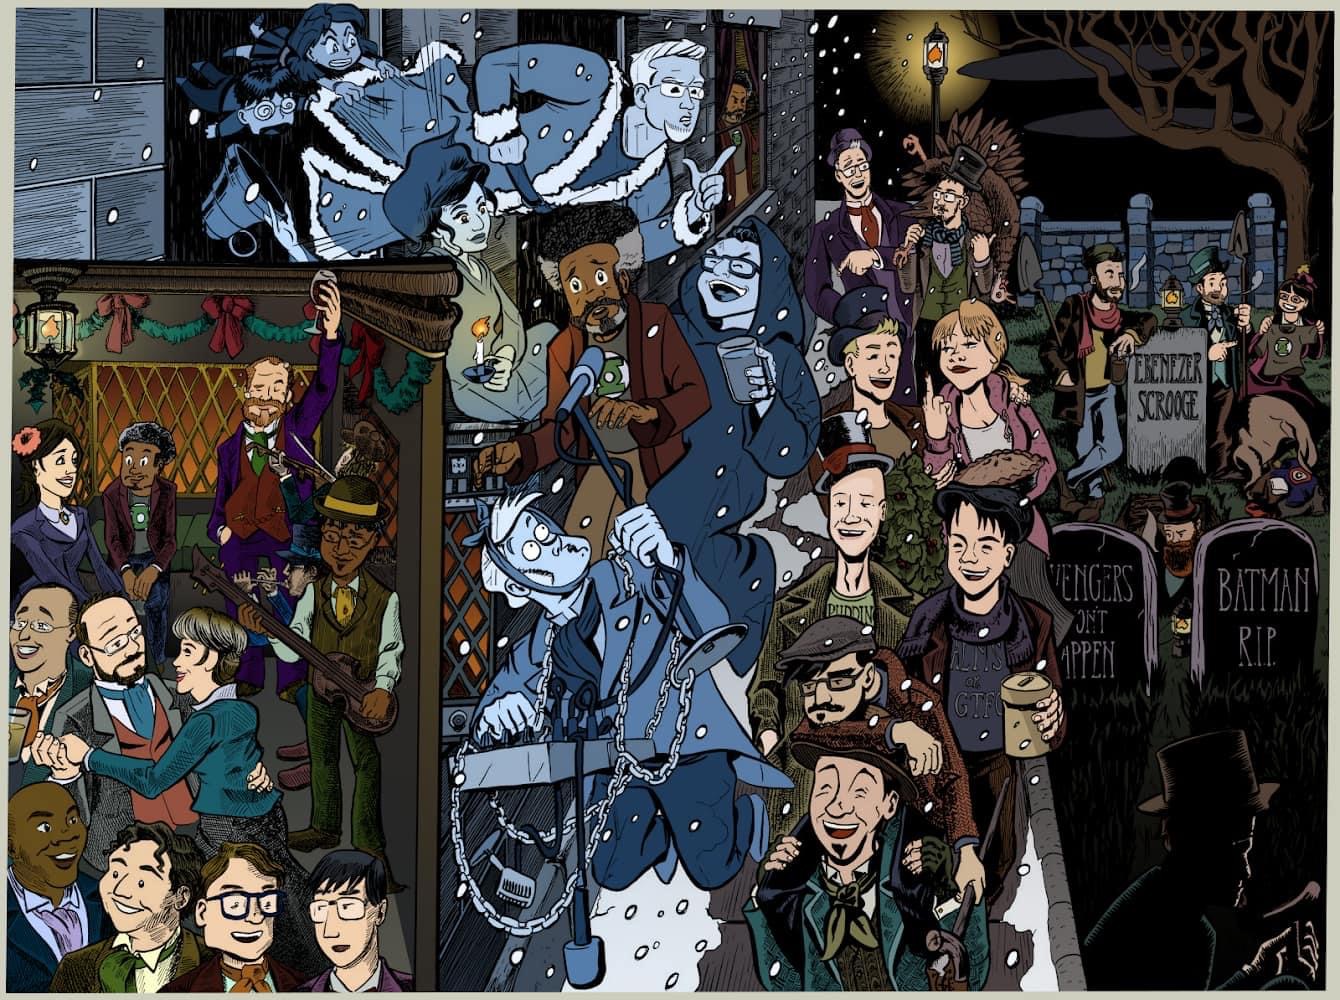 Illustration from A Christmas Carol, featuring members of the League of Extremely Ordinary Gentlemen and regular guests as characters from the story. Dr. NerdLove is the Ghost of Christmas Present